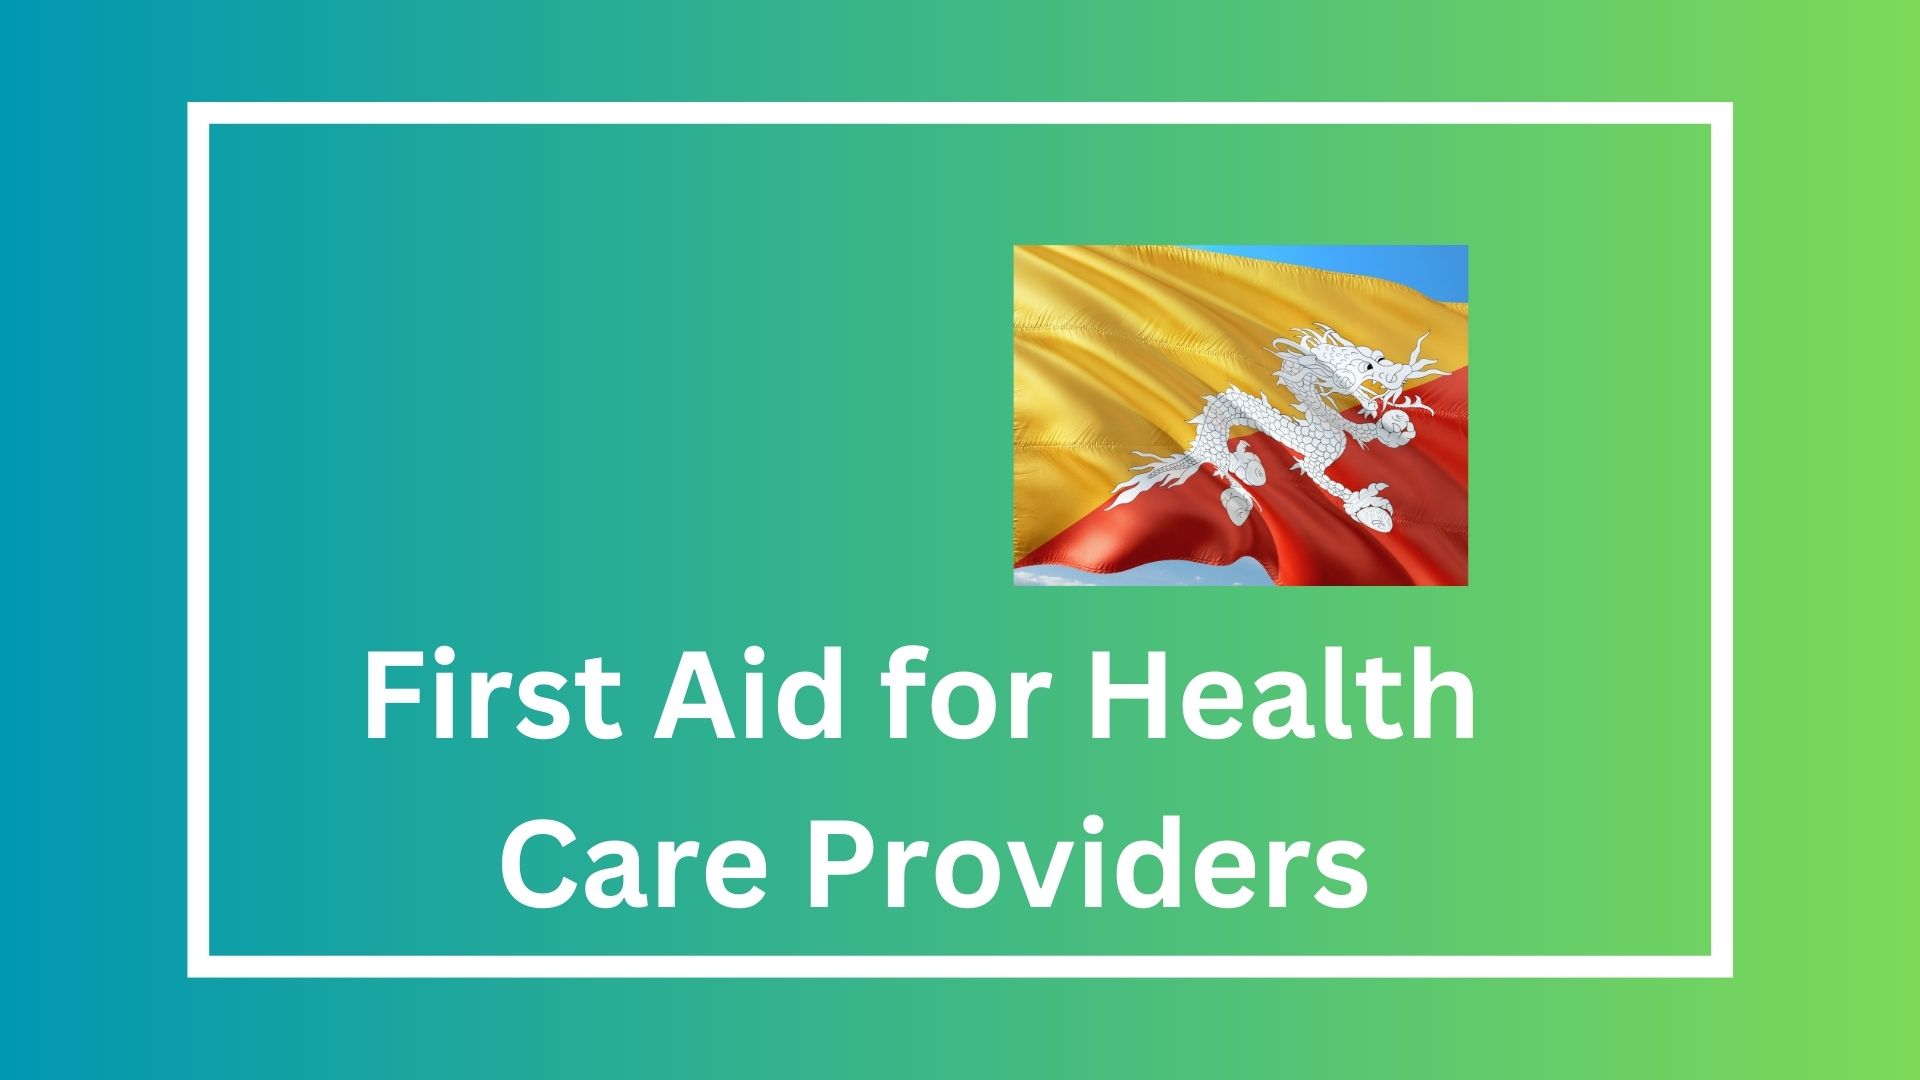 First Aid for Health Care Providers